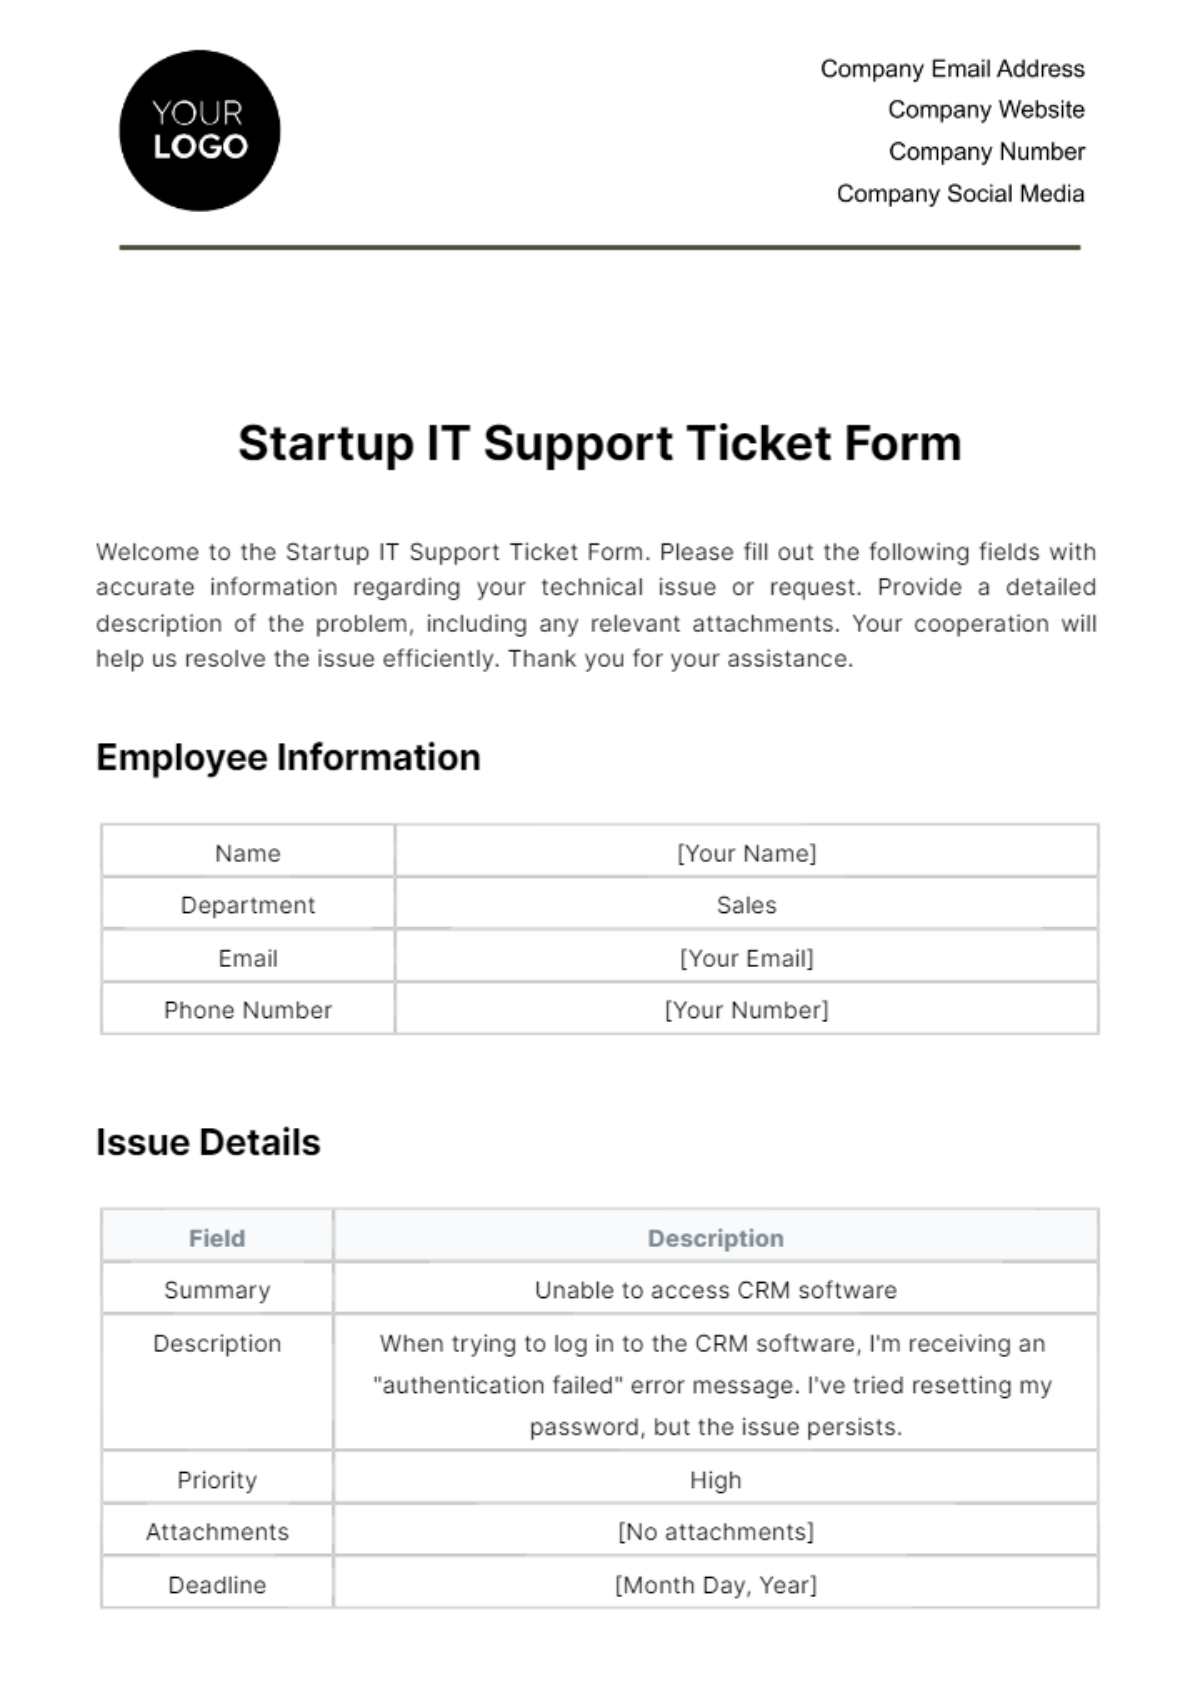 Startup IT Support Ticket Form Template